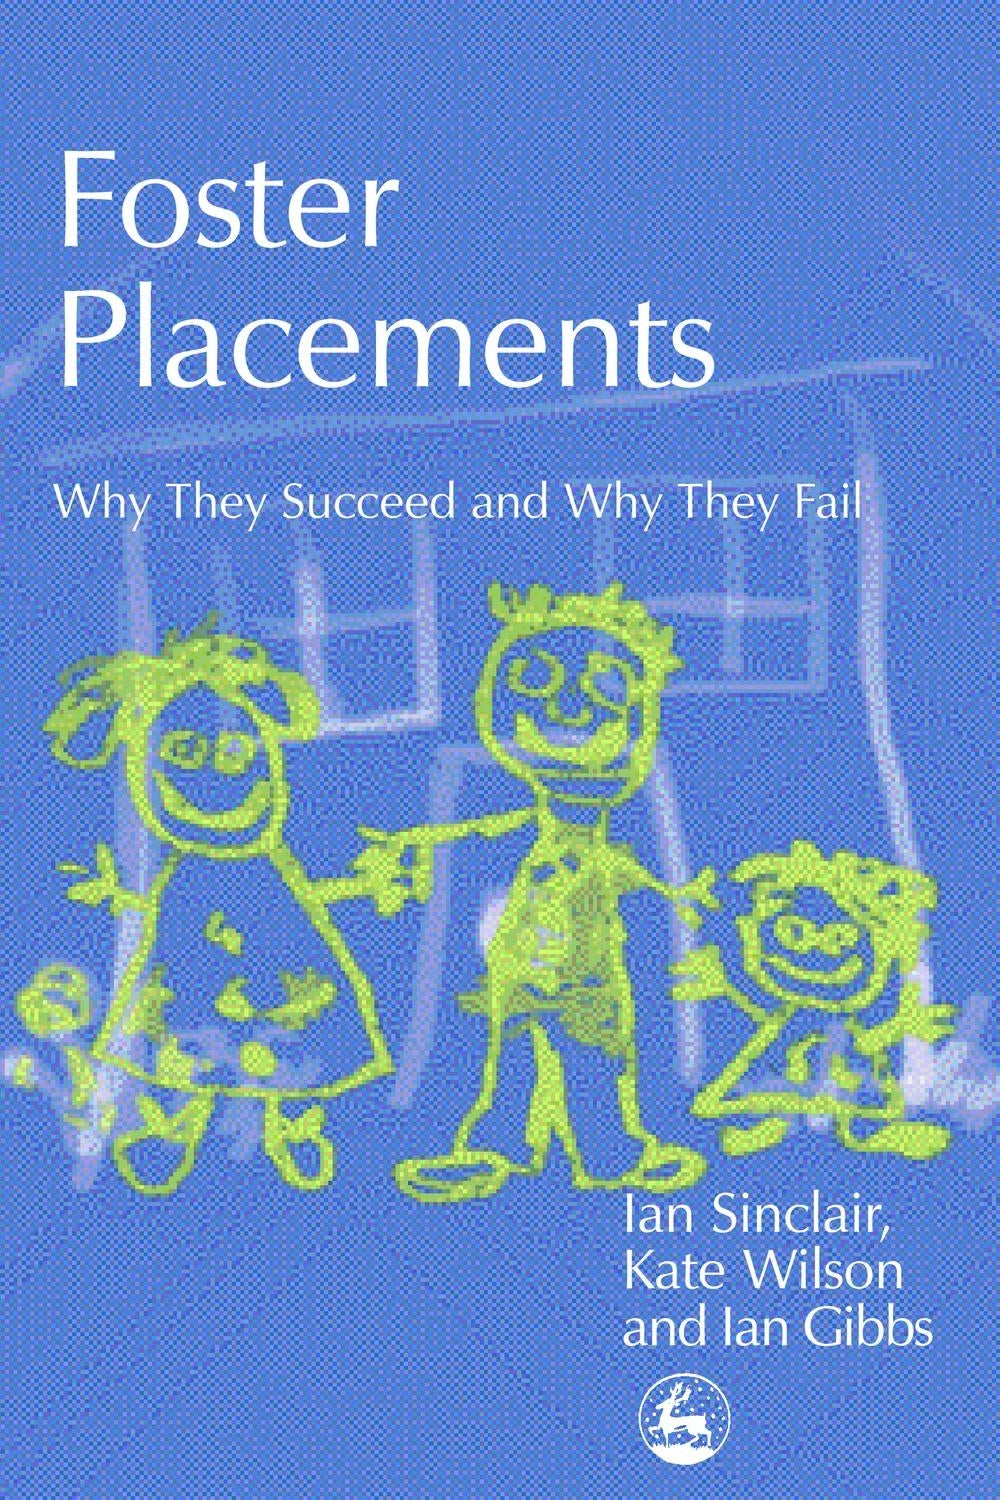 Foster Placements by Kate Wilson, Ian Gibbs, Ian Sinclair